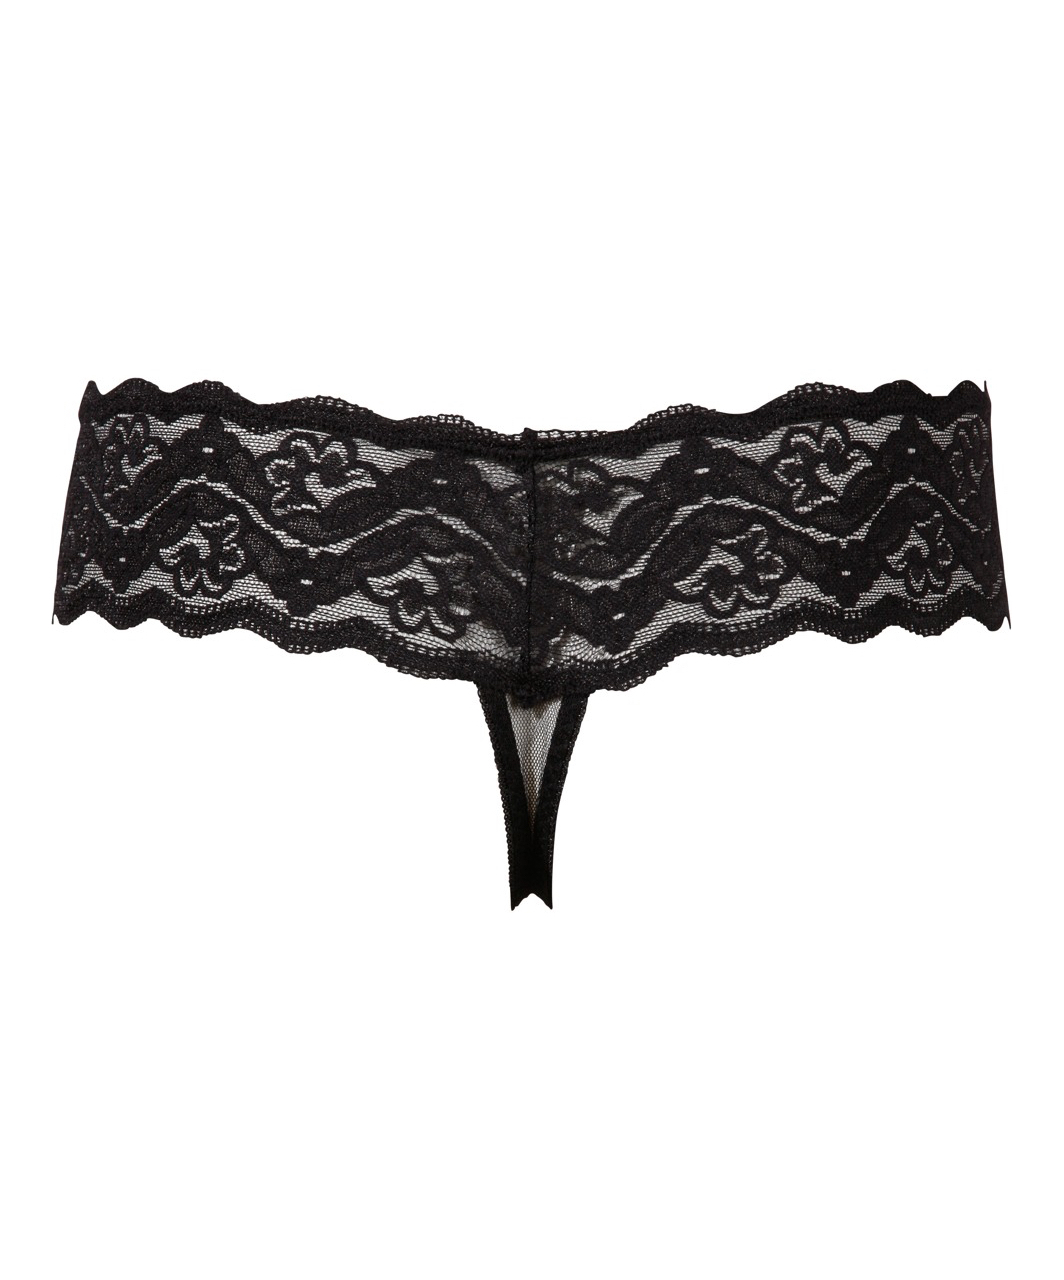 Cottelli Lingerie black lace string with pearls